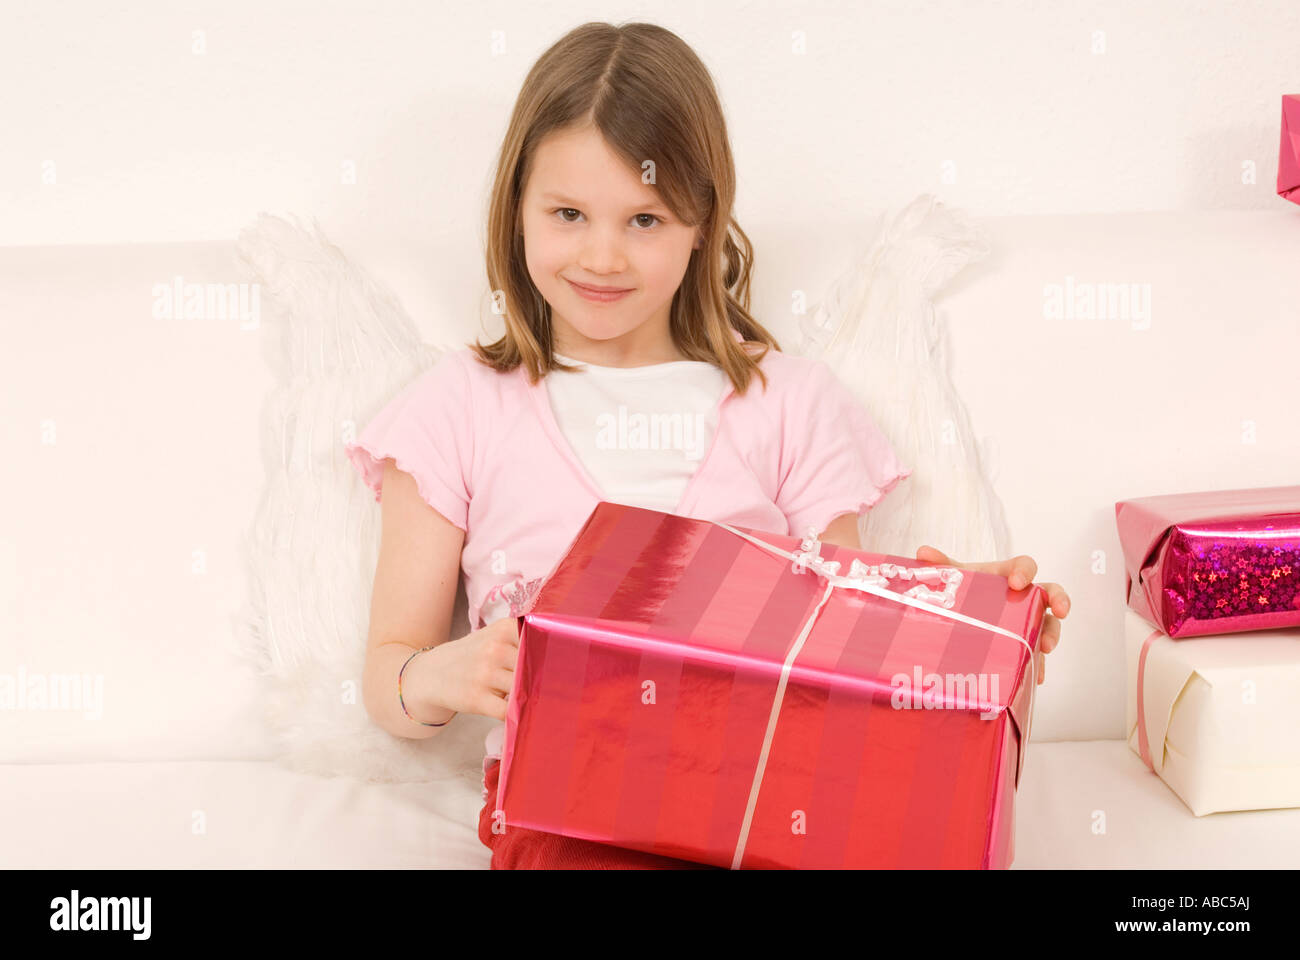 Portrait of Girl sitting on sofa holding presents Banque D'Images